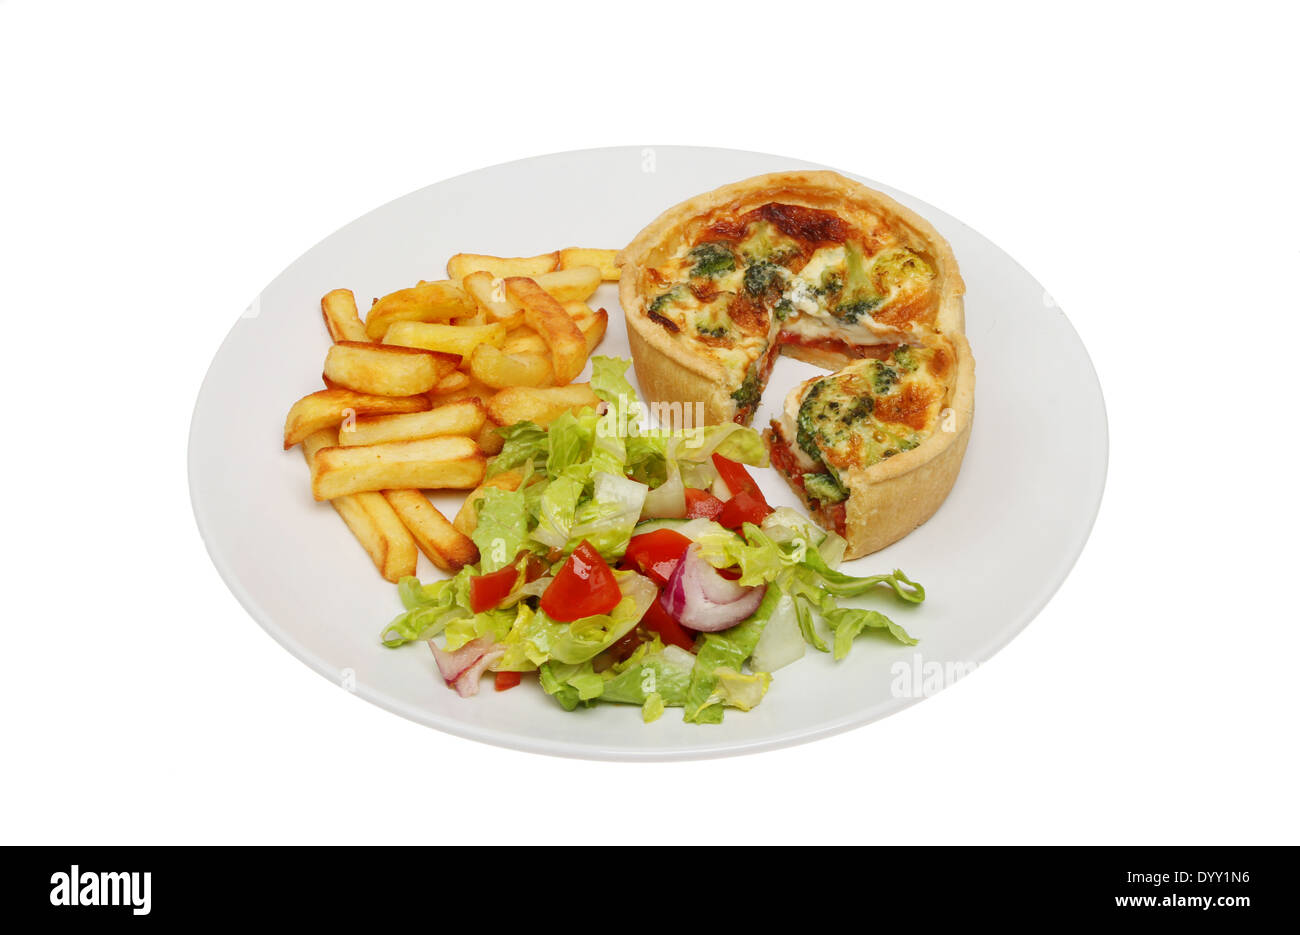 Cheese, tomato and broccoli quiche with salad and chips on a plate isolated against white Stock Photo